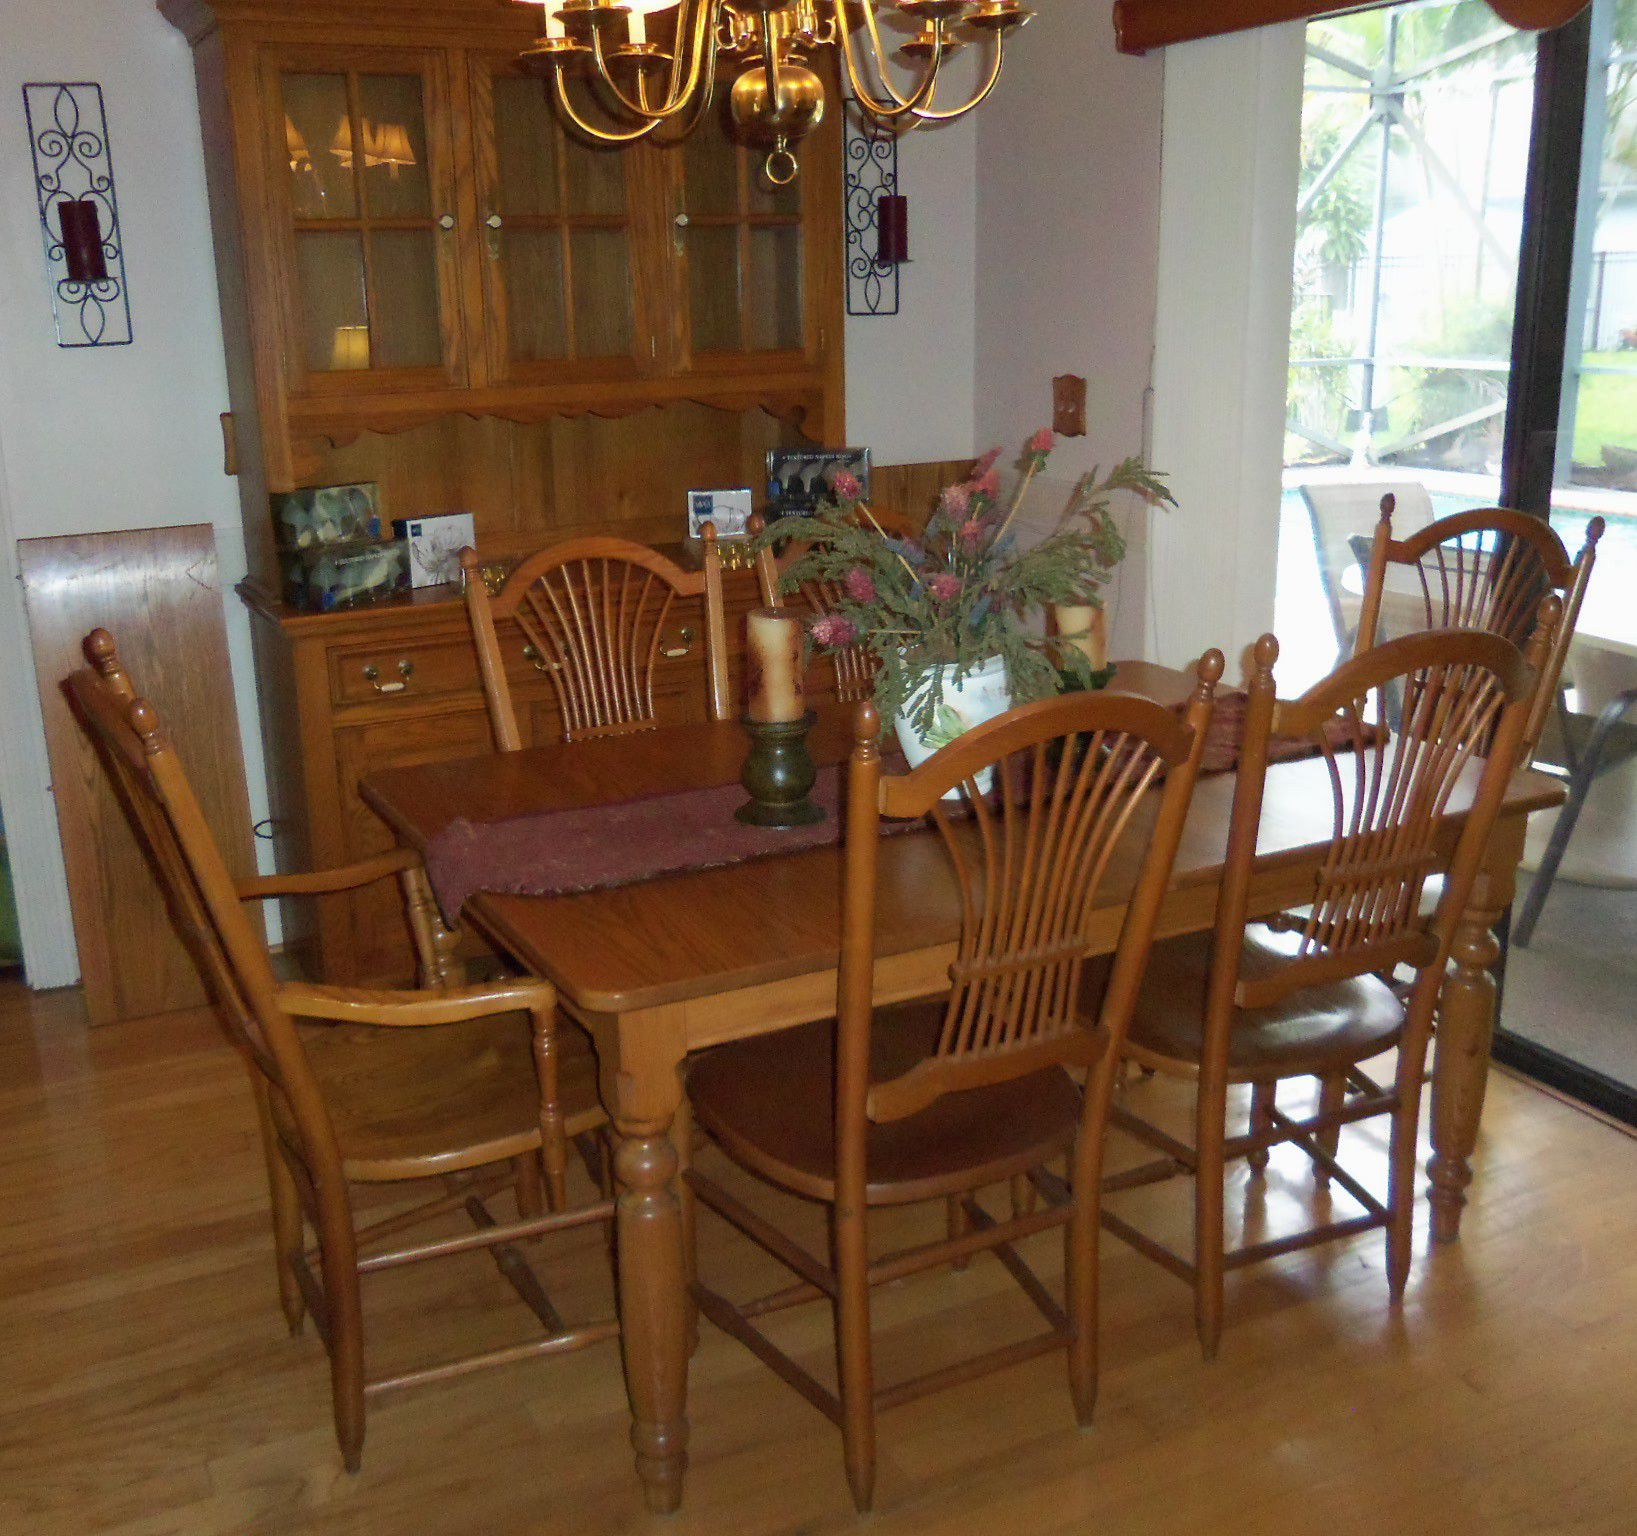 PENNSYLVANIA HOUSE DINING ROOM TABLE WITH 6 (SIX) CHAIRS + 2 (TWO) TABLE EXTENSIONS - SOLID OAK WOOD TABLE